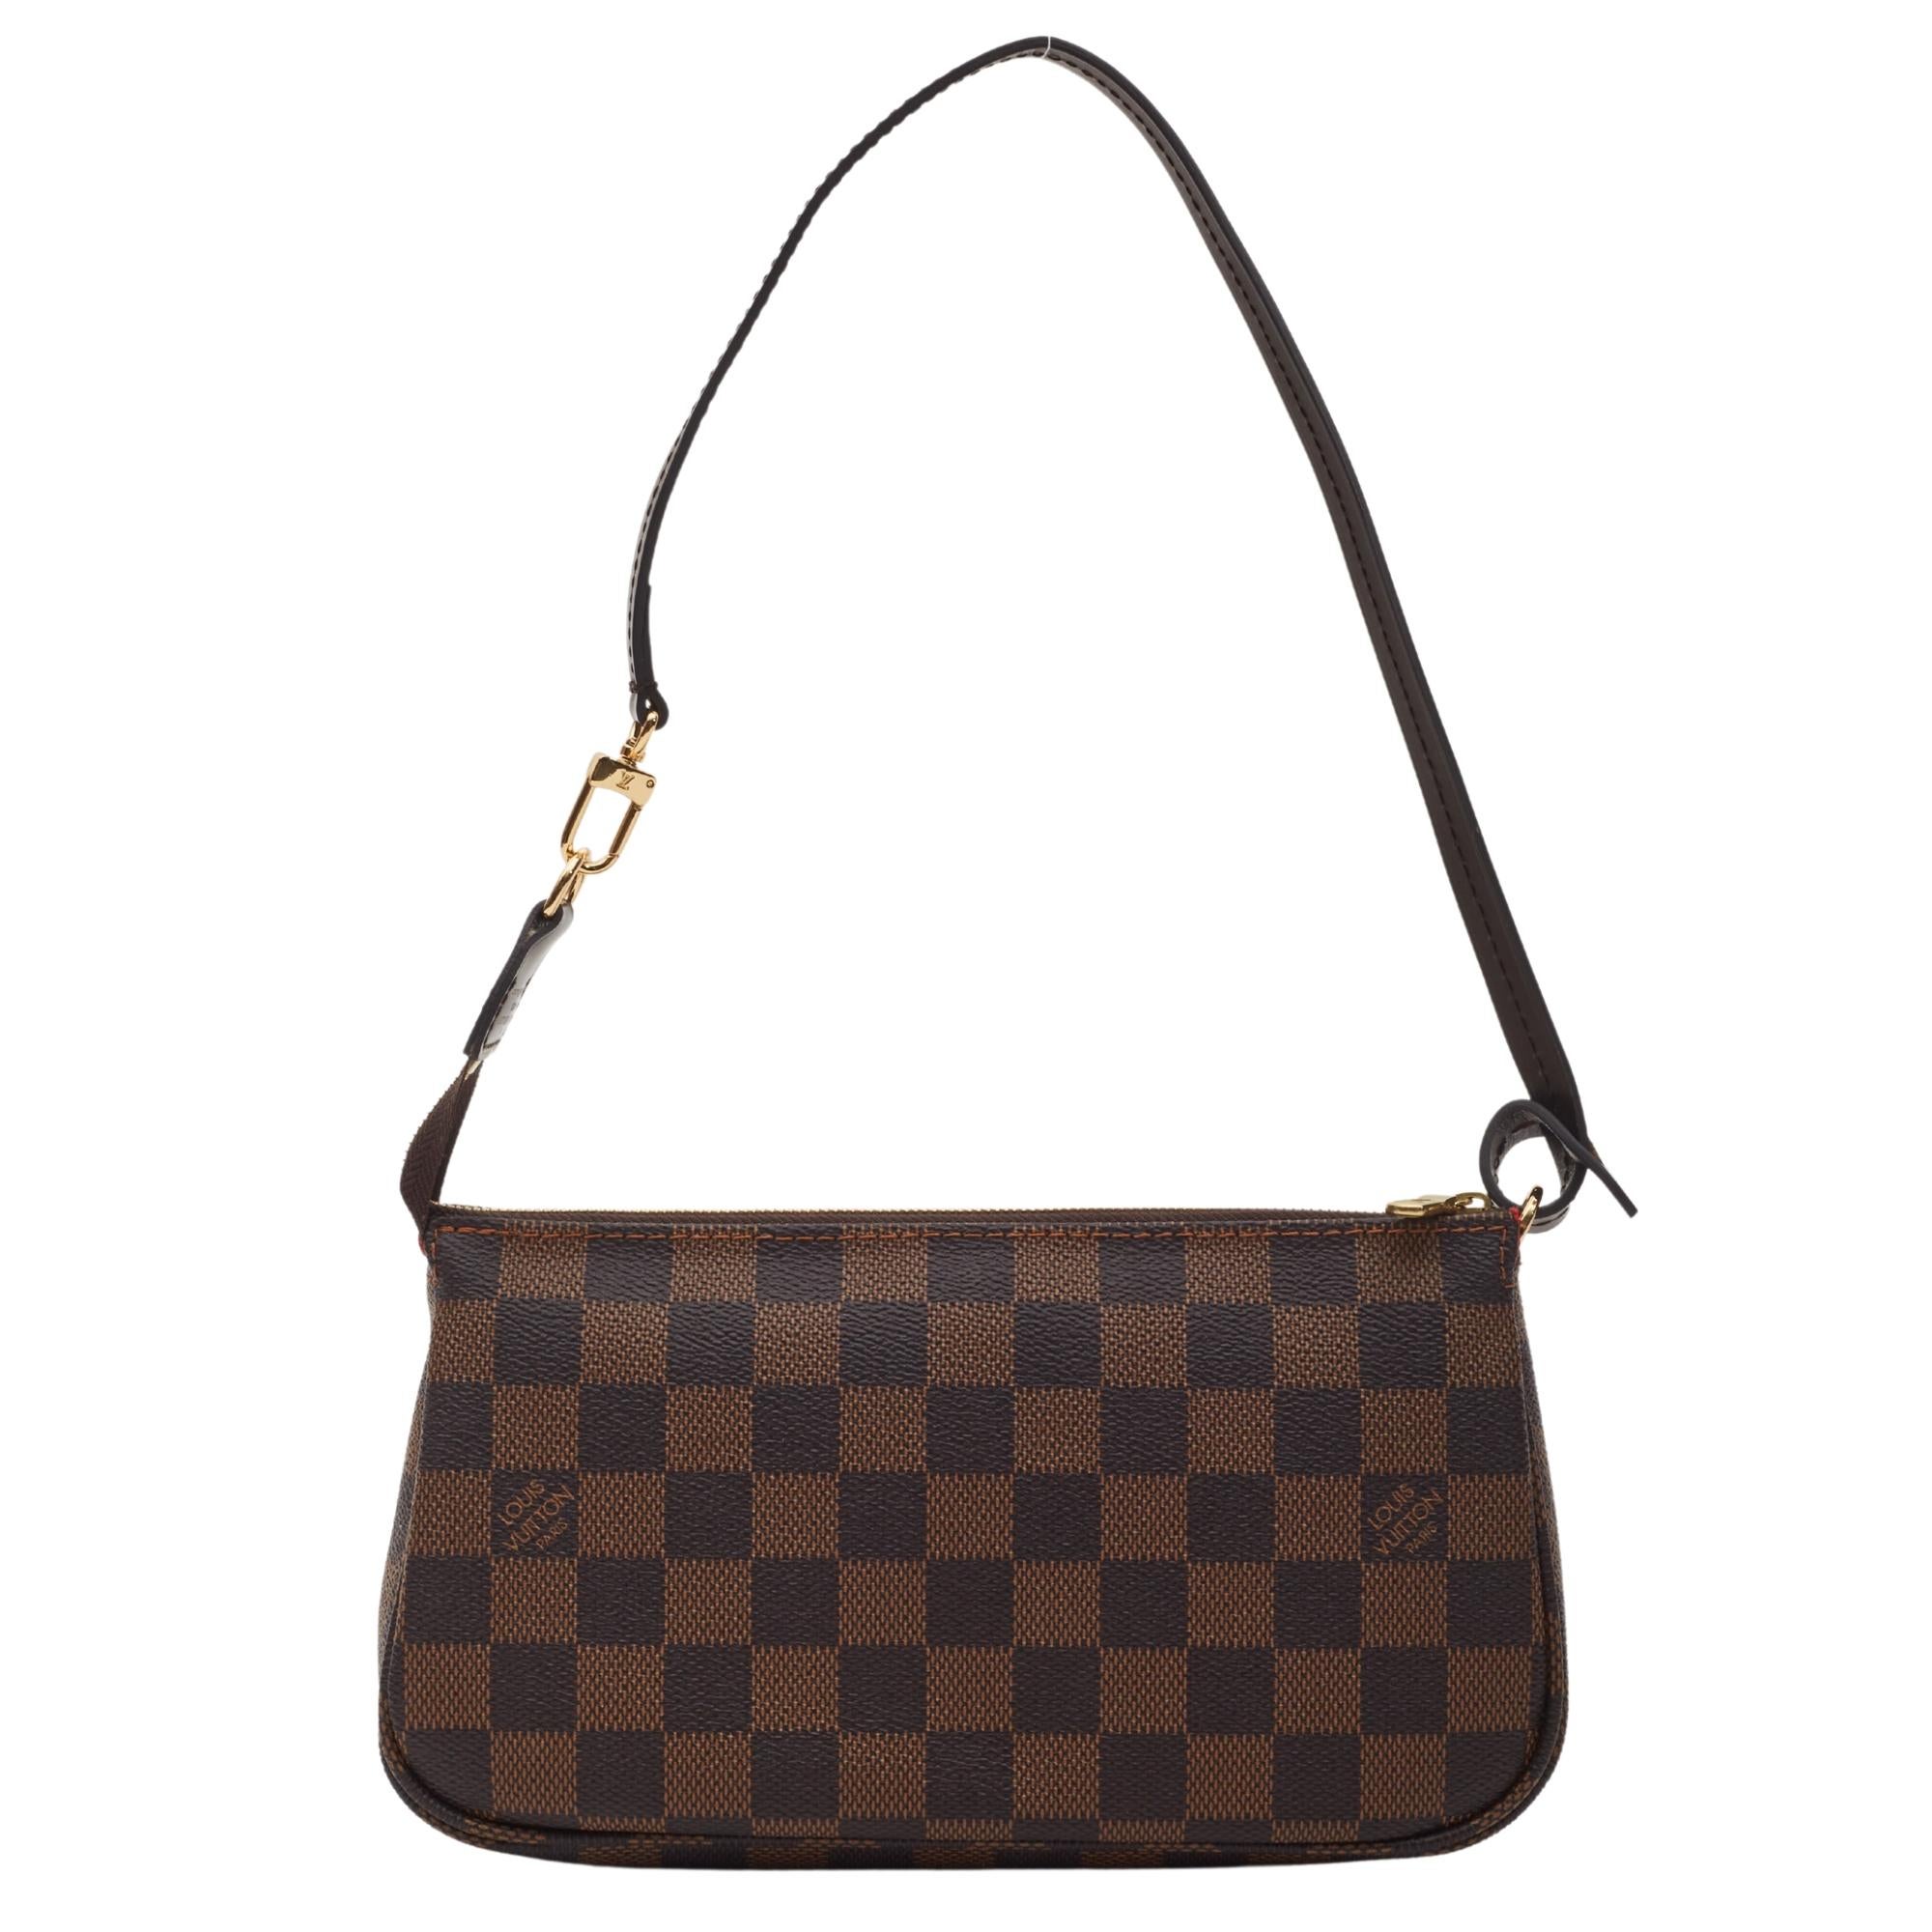 Color: Brown/ Damier ebene
Material: Coated canvas with brown leather finishes.
Date Code: CF0271
Measures: H 4.5” x L 9